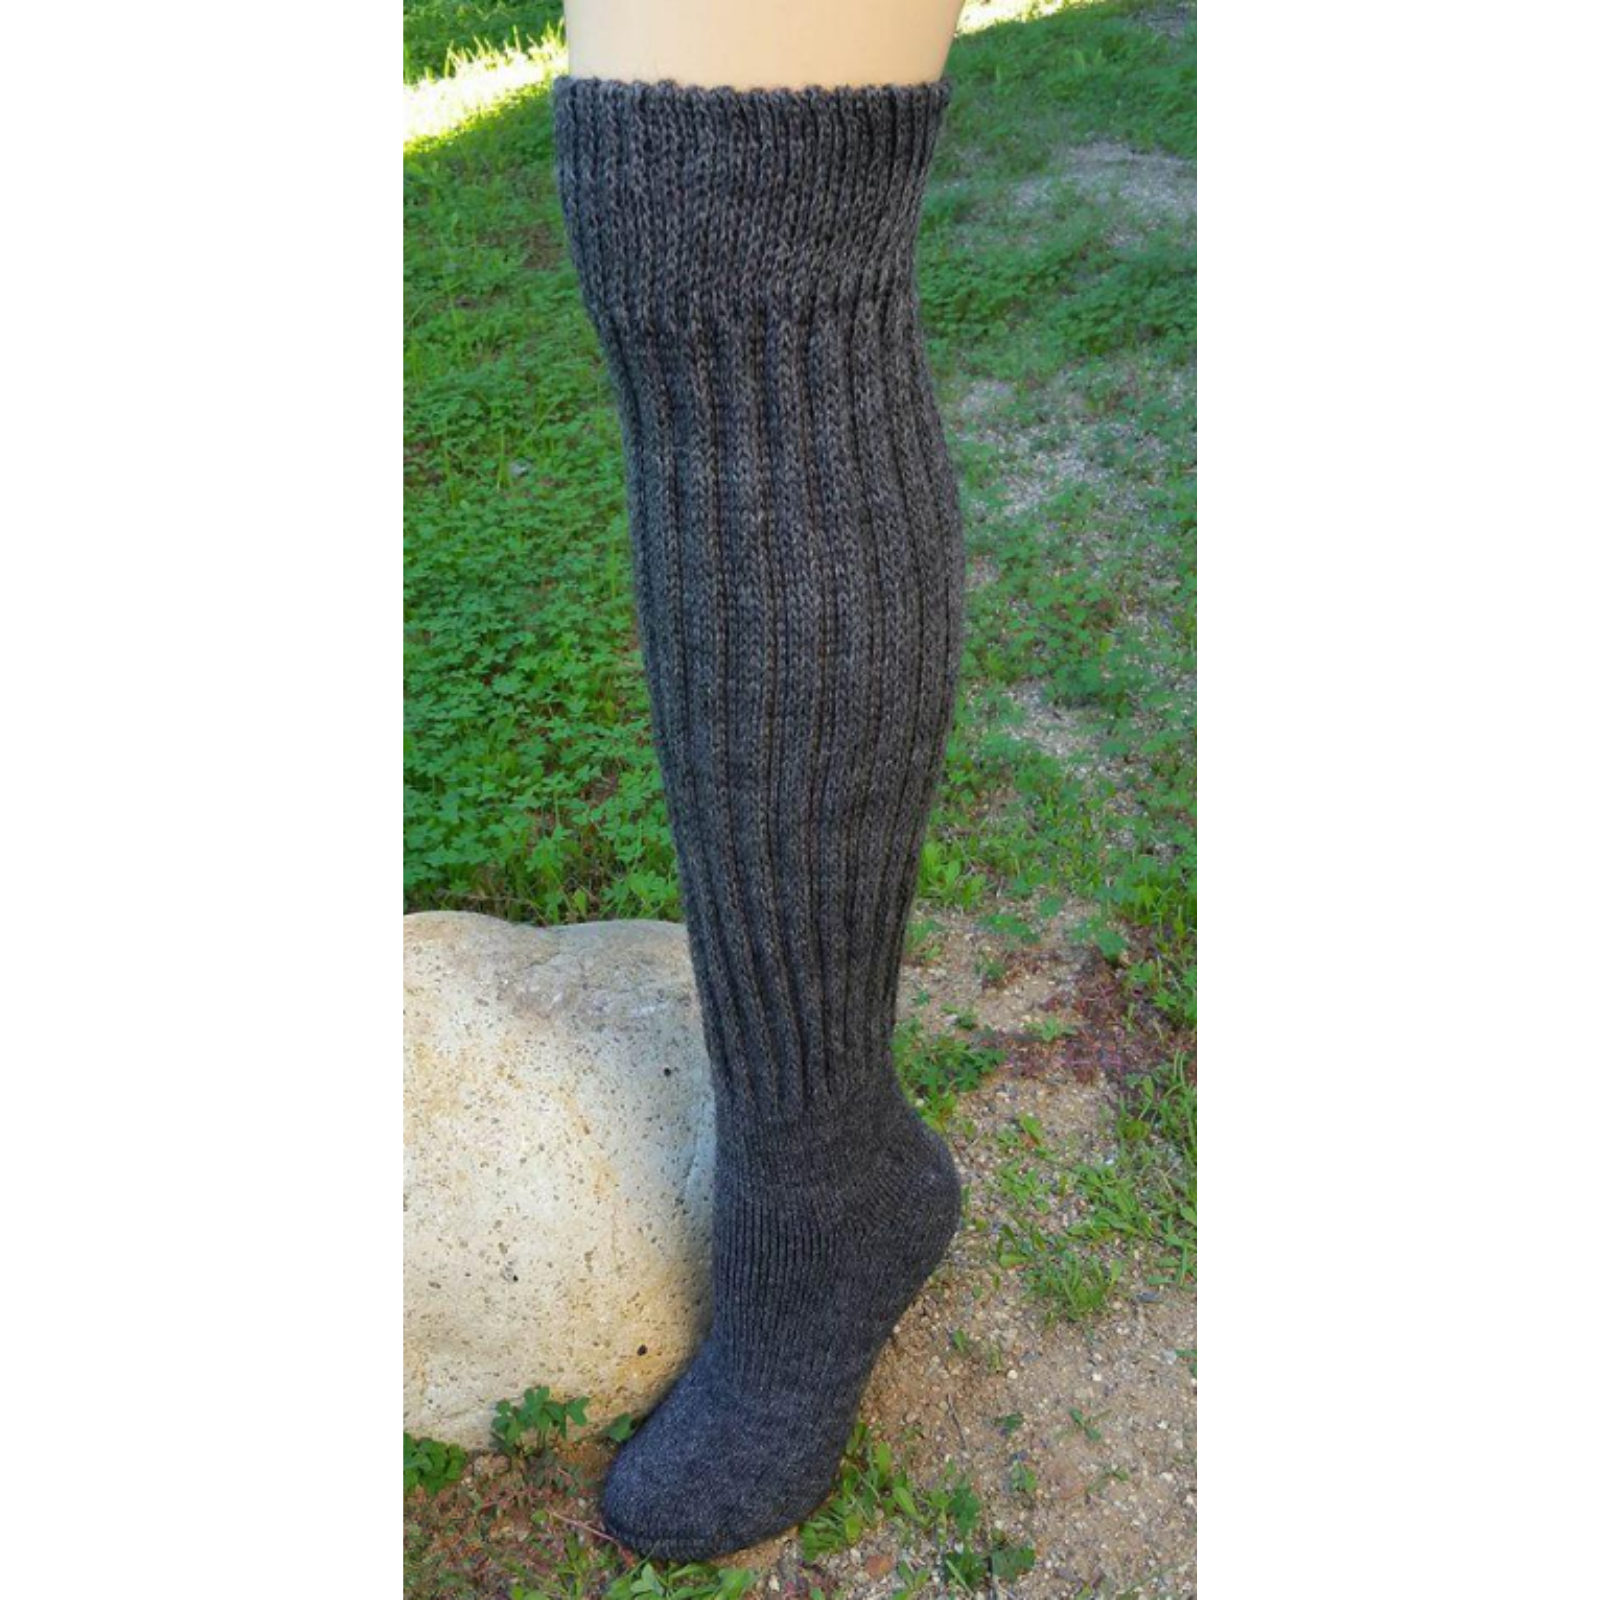 Charcoal Choice Alpaca Products Knee High women's socks featuring knee high sock with ribbing